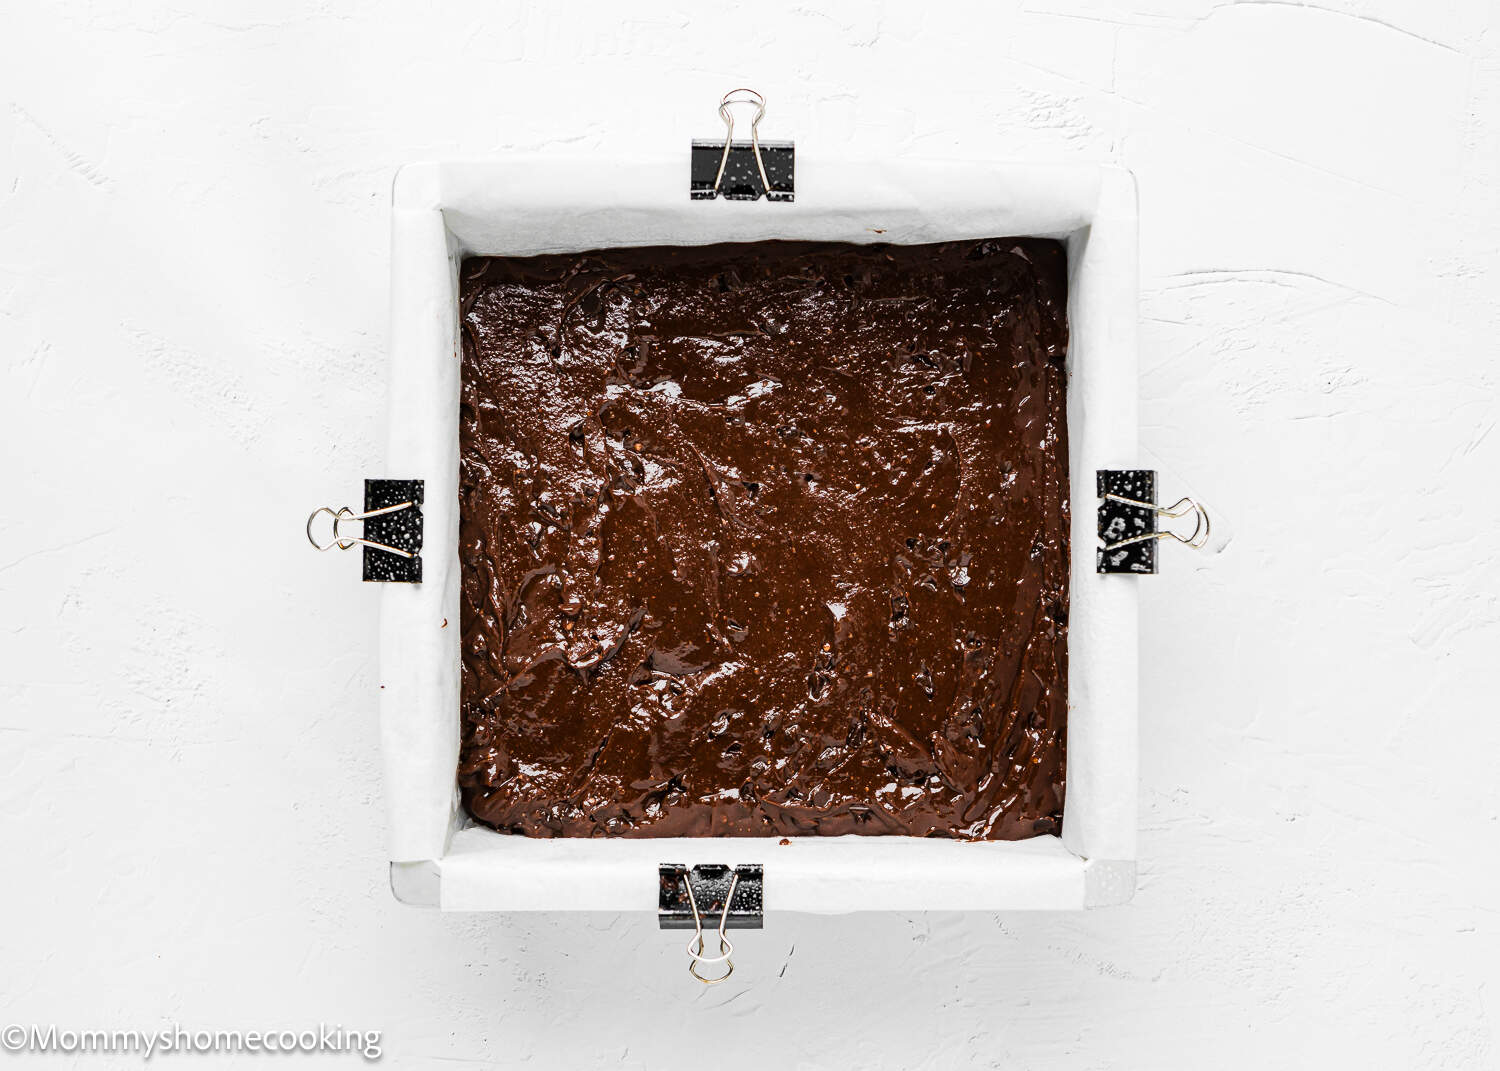 A boxed brownie batter made without eggs in a baking pan on a white surface.